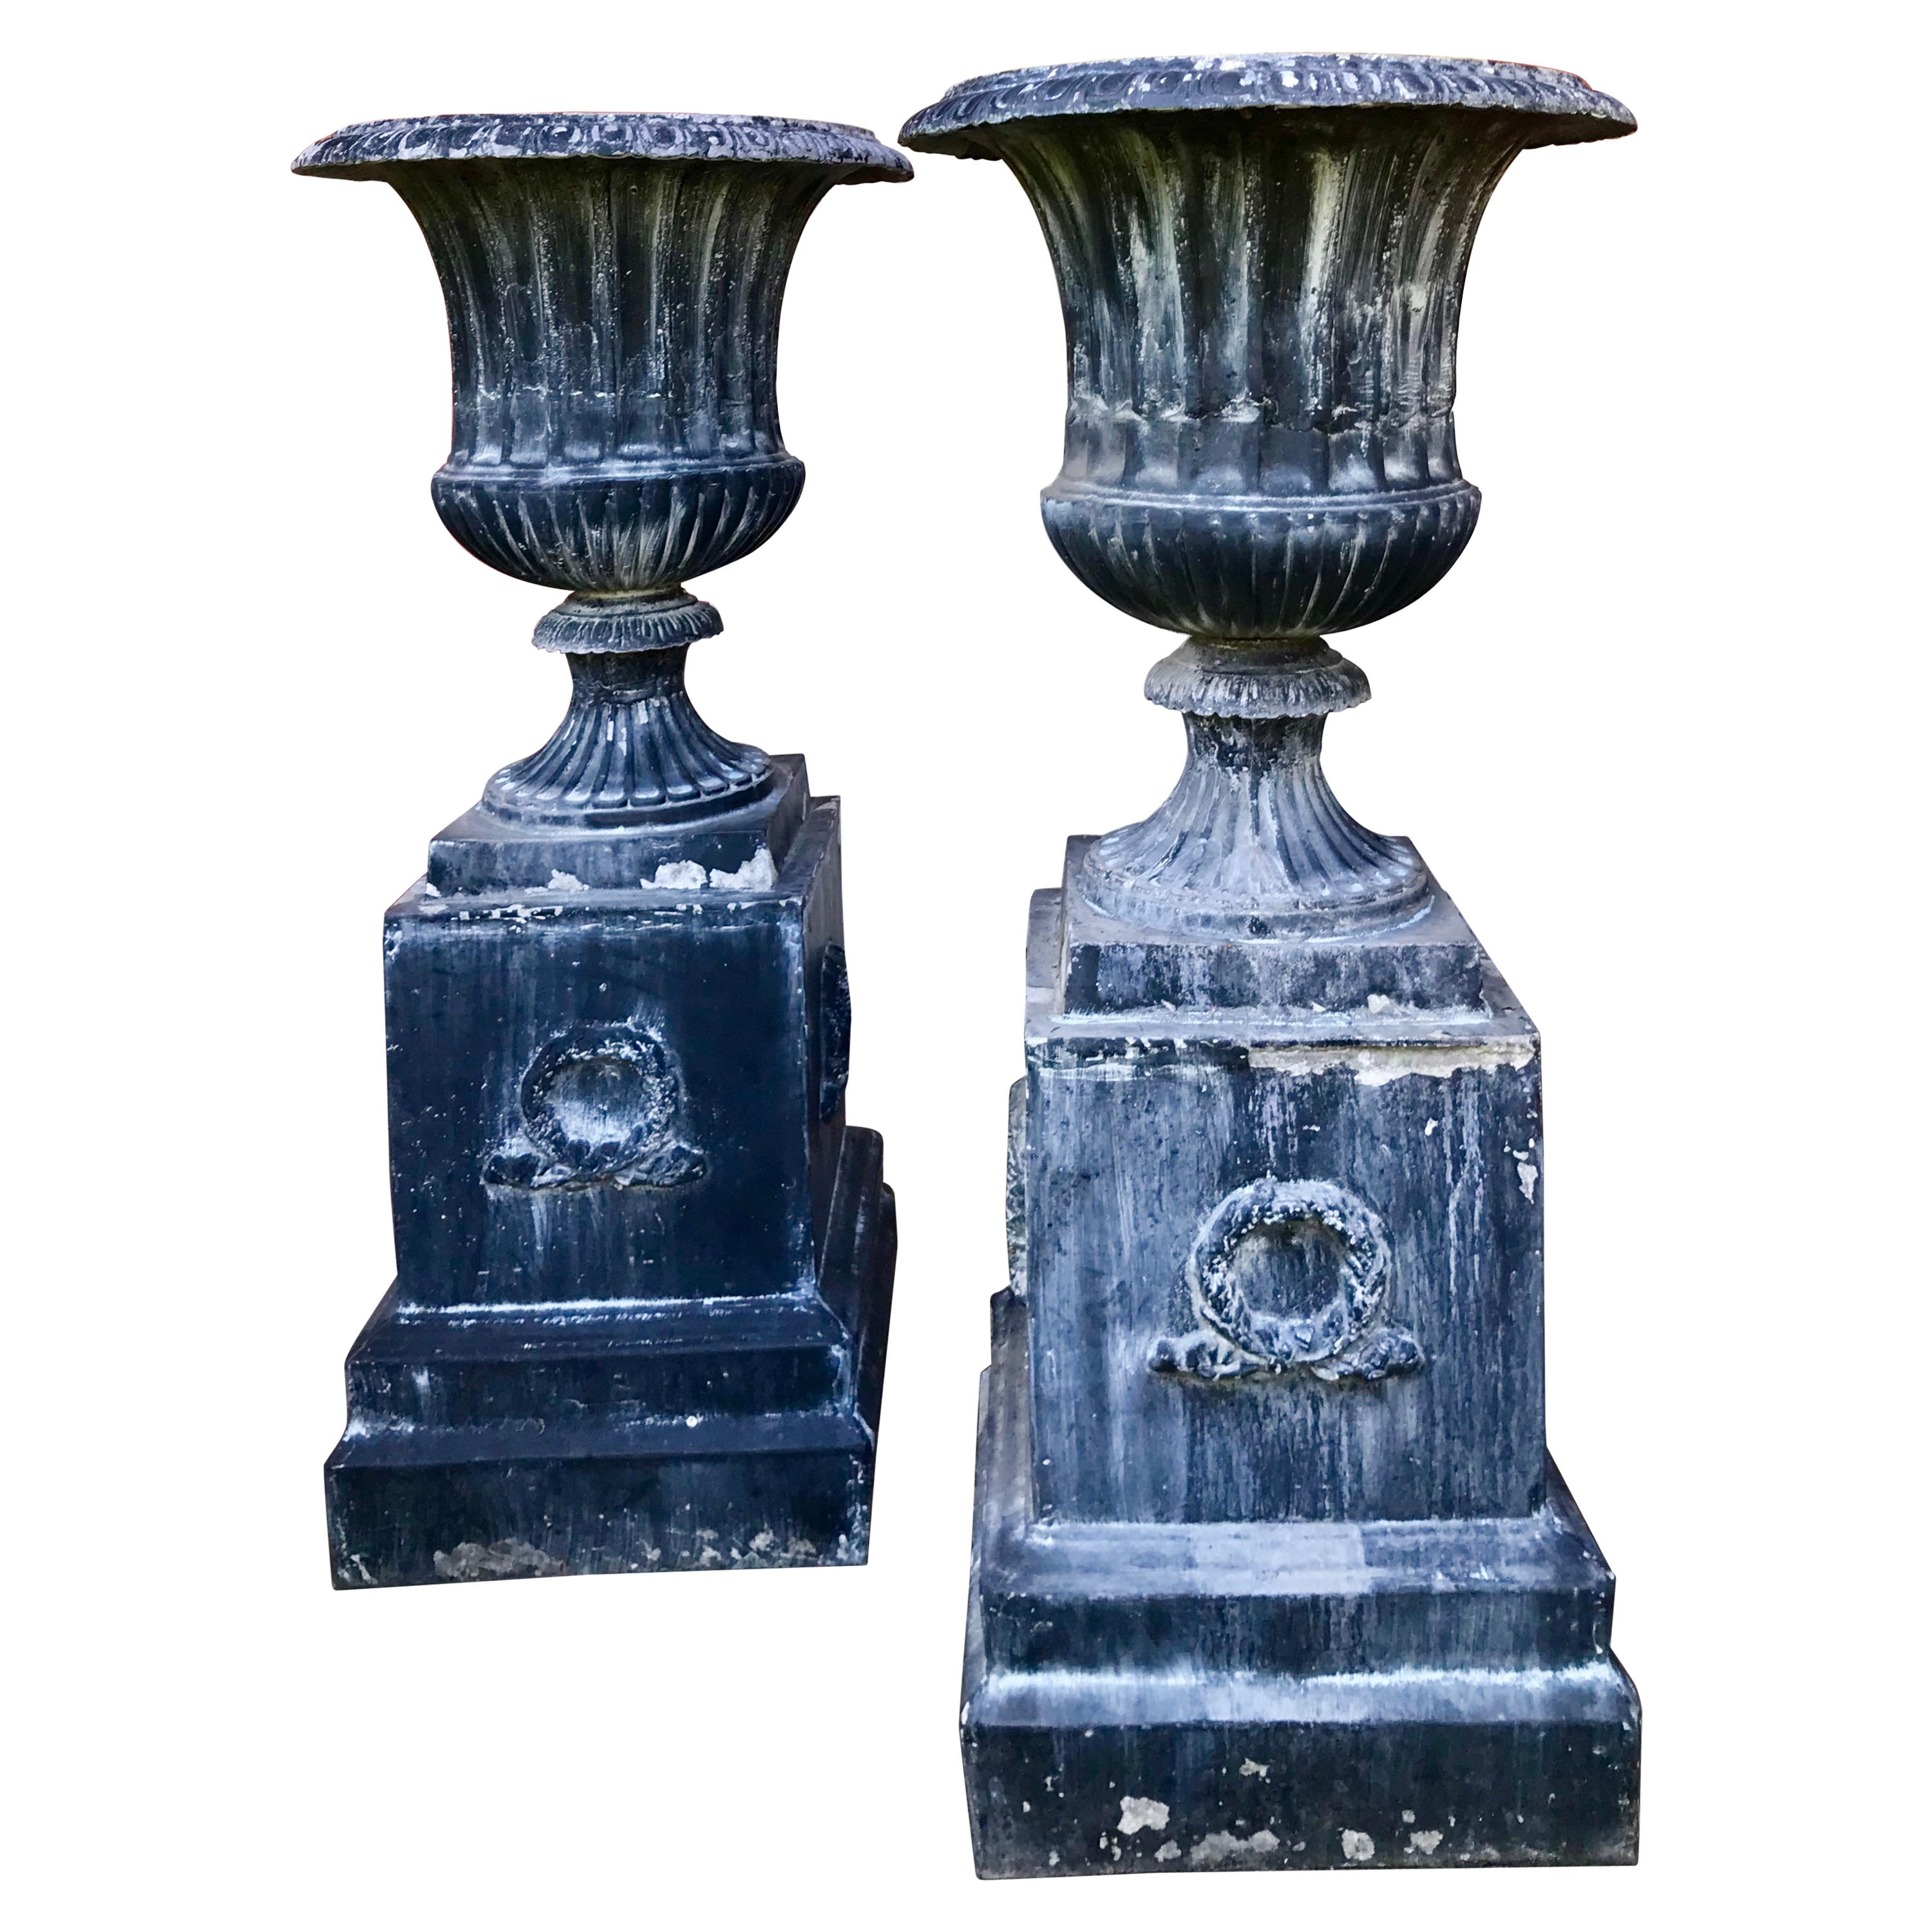 Pair of Tall Classical Styled Fluted Metal Garden Urns on Stands For Sale